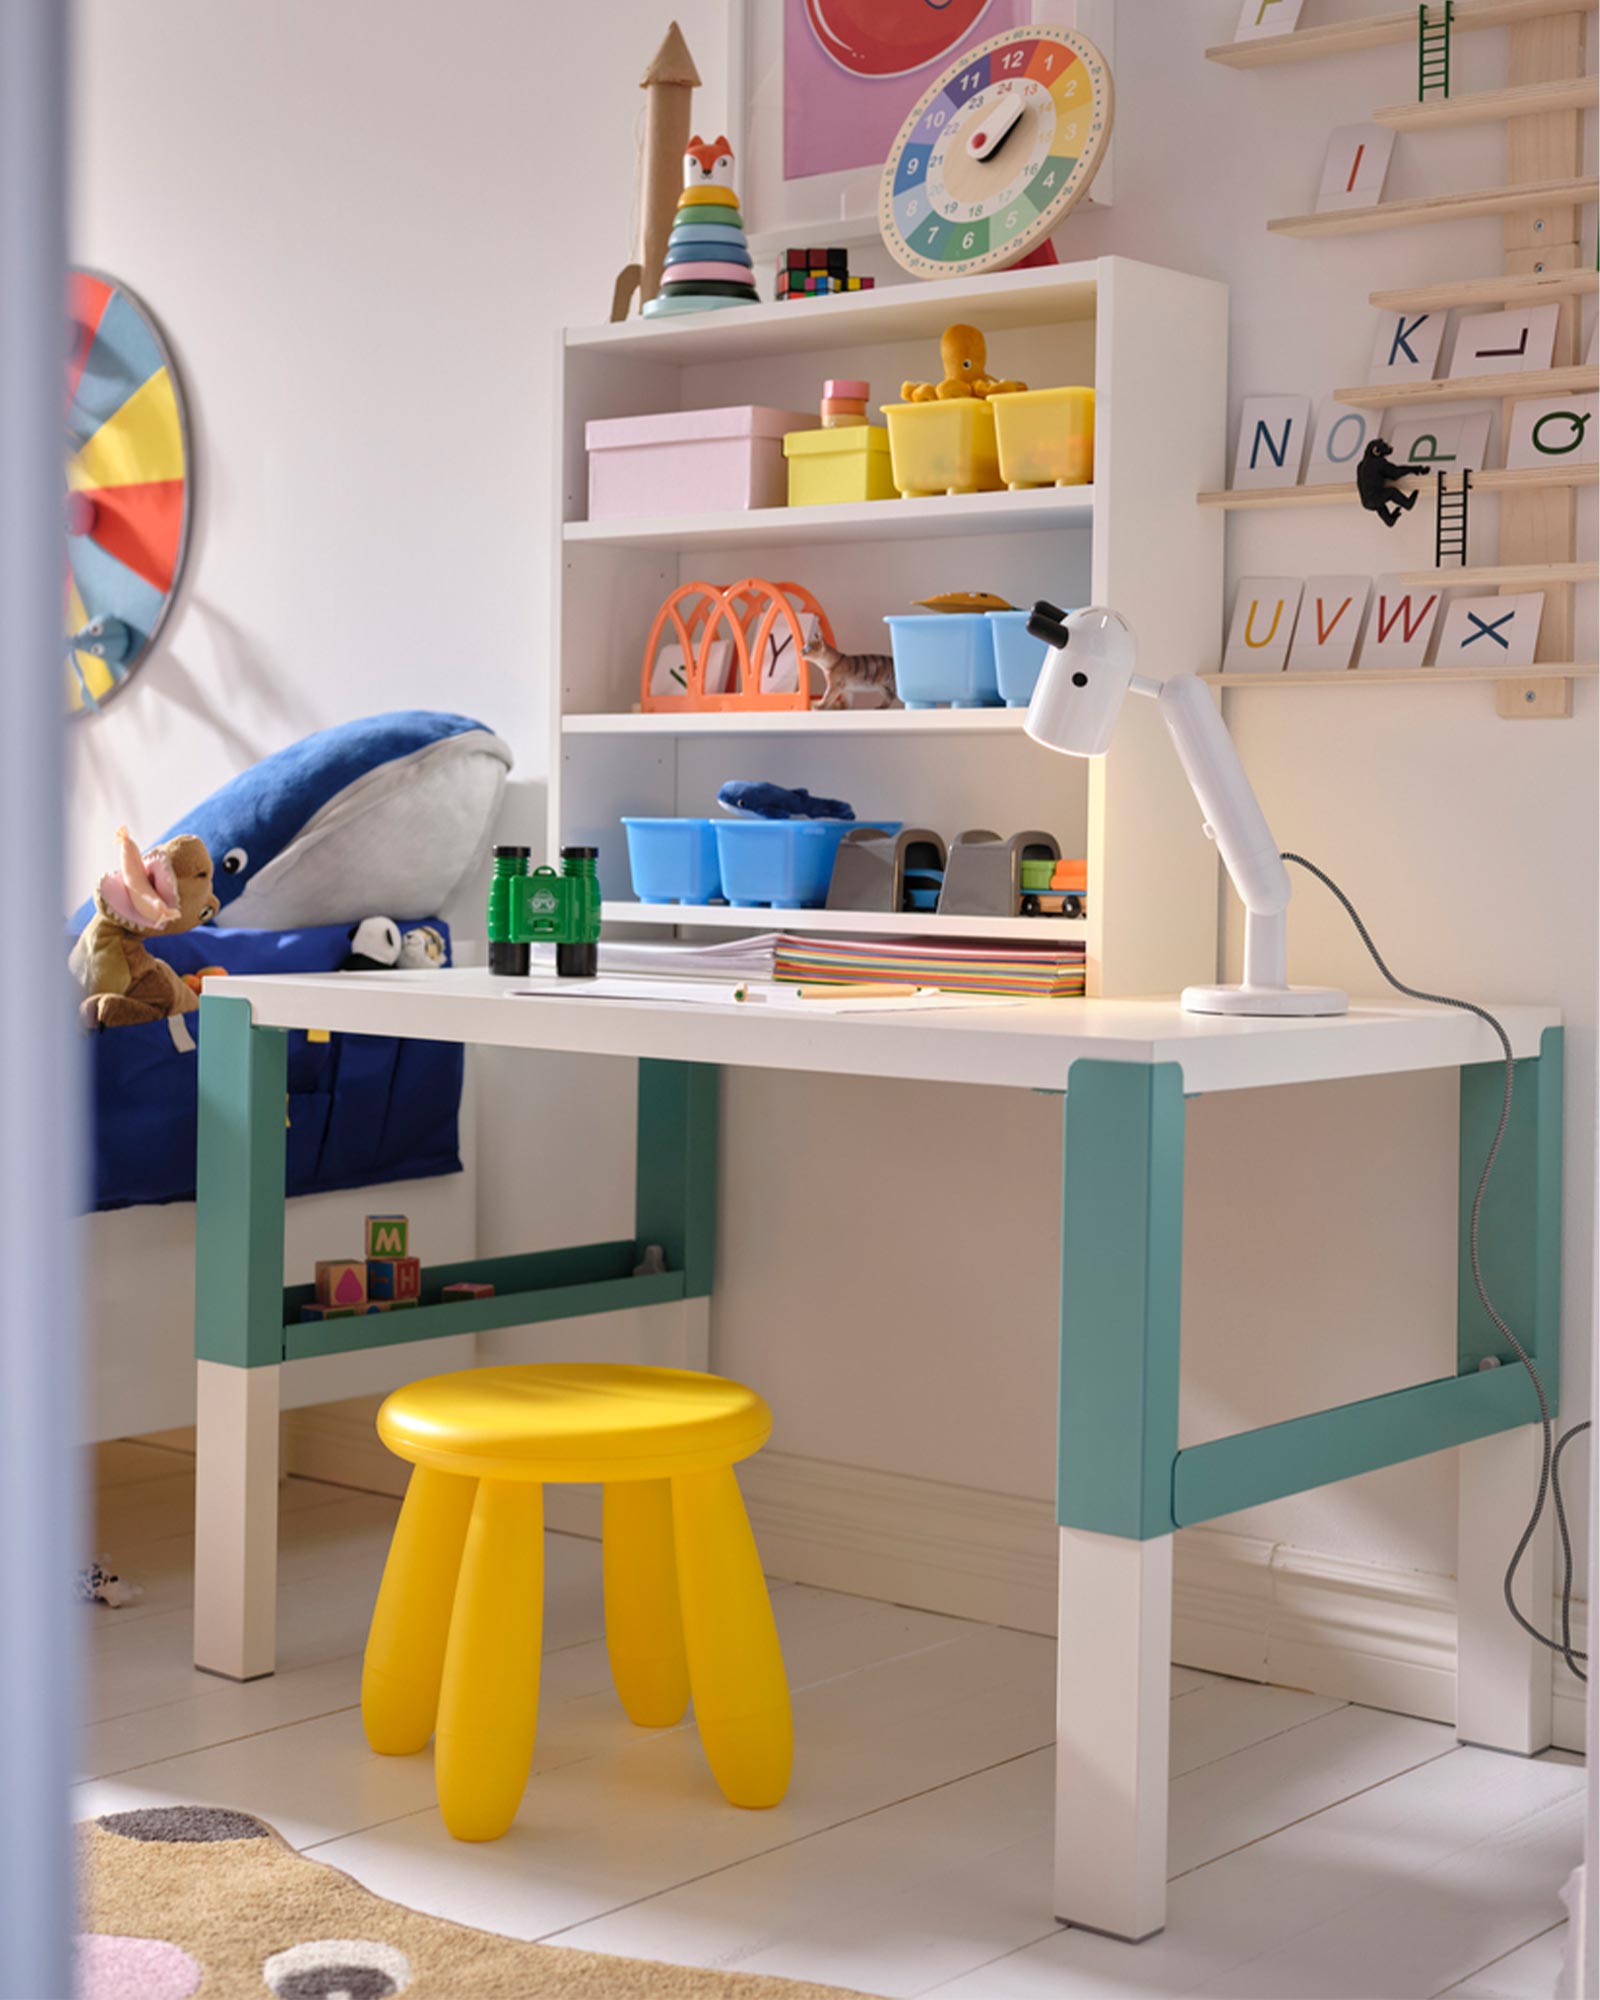 IKEA-a small childrens room 02